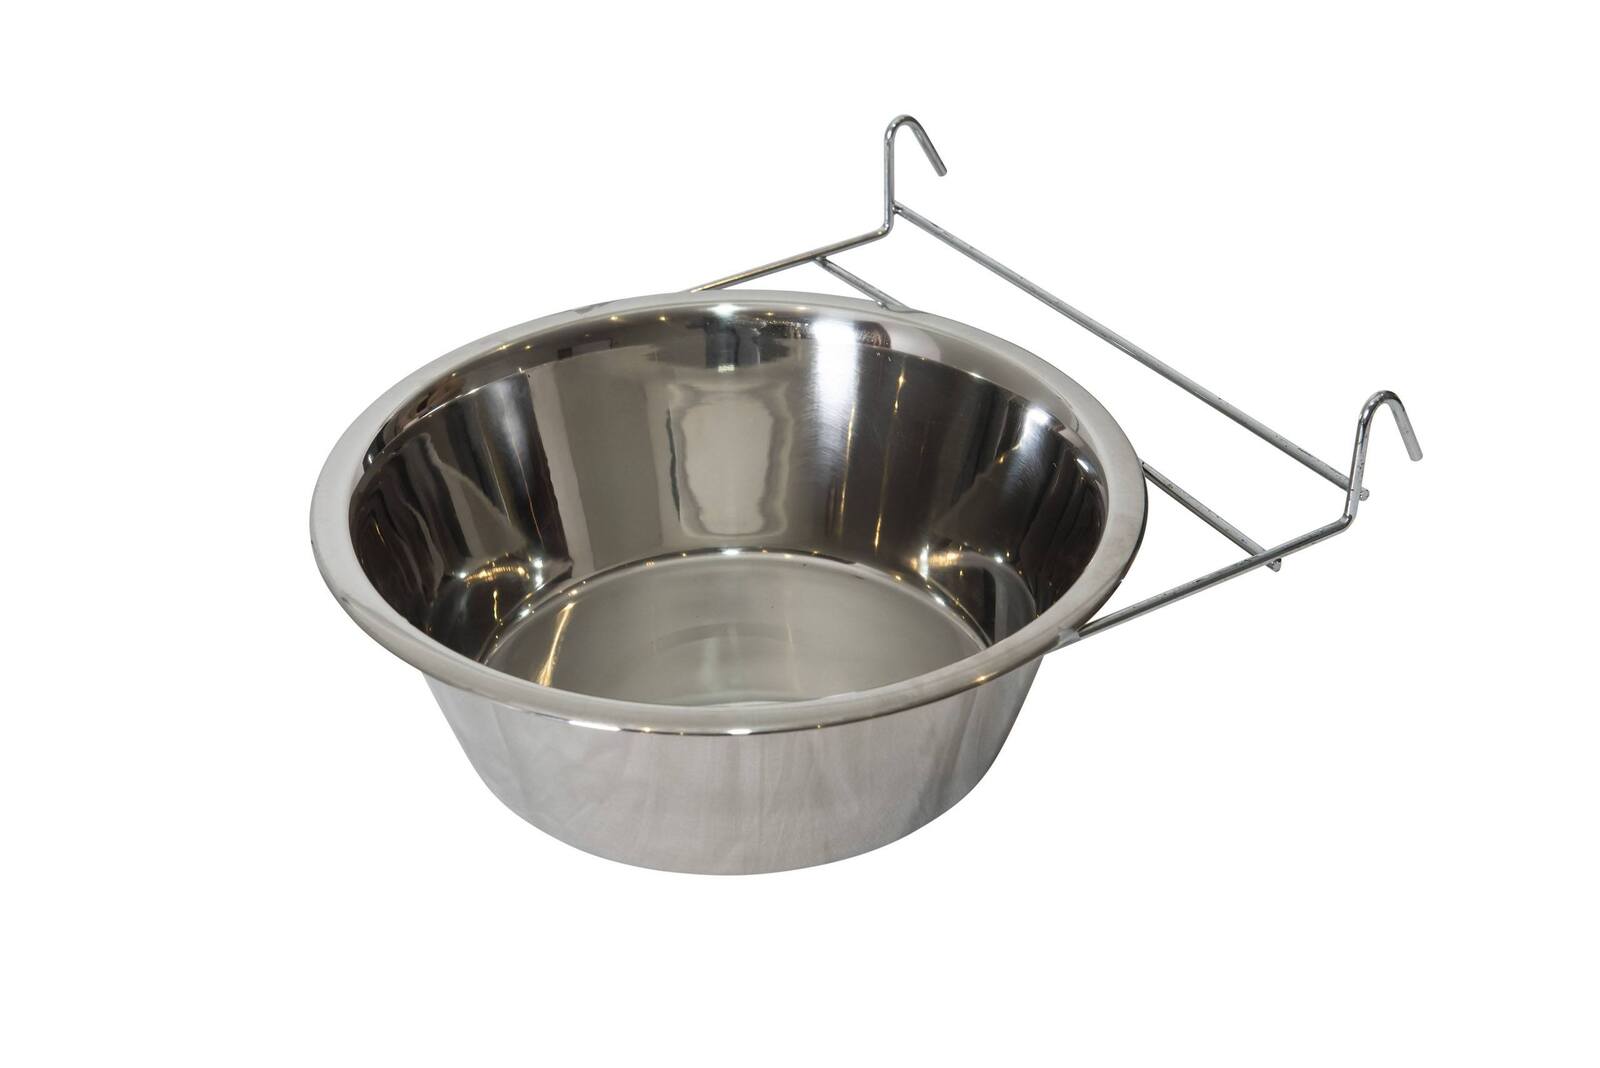 YES4PETS 2 x Stainless Steel Pet Rabbit Bird Dog Cat Water Food Bowl Feeder Chicken Poultry Coop Cup 1.9L